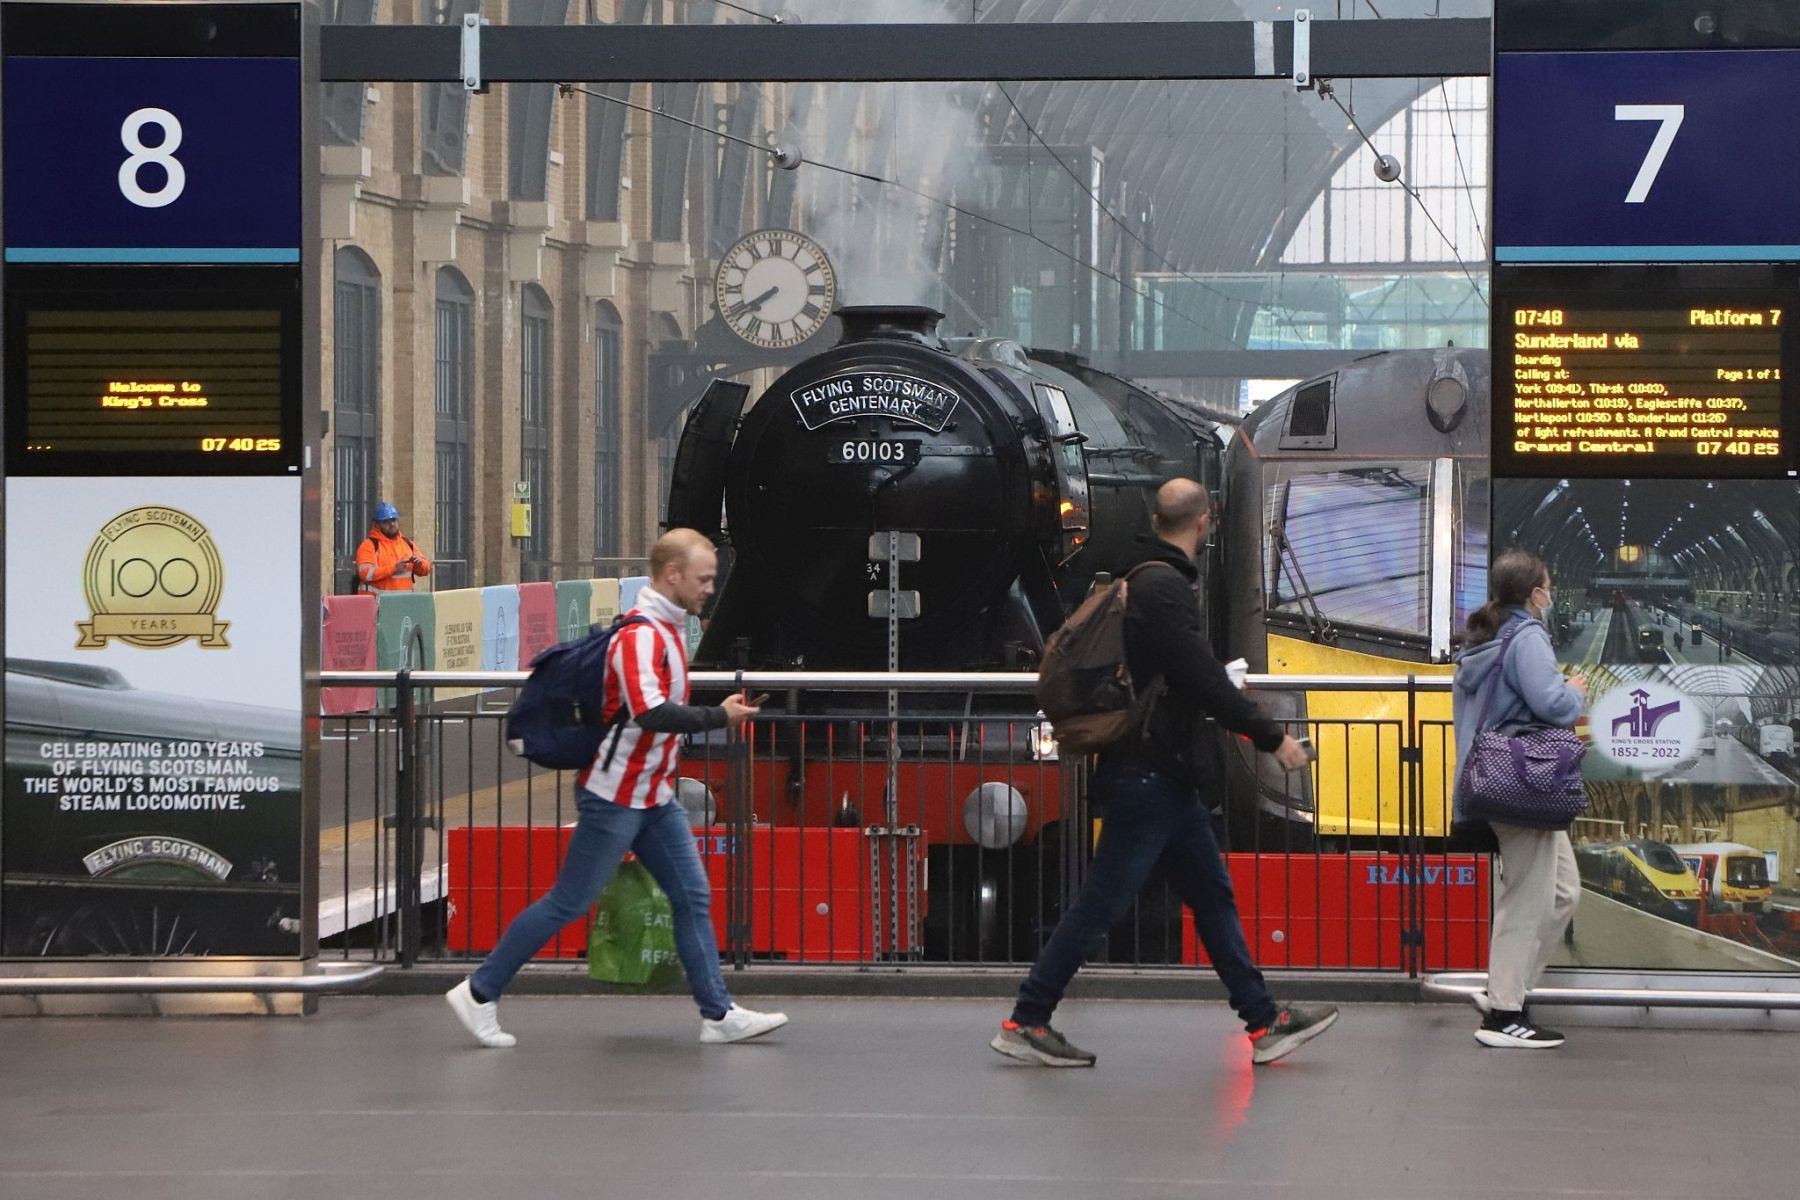 Flying Scotsman steam locomotive at King's Cross railway station platform 8 for the 170th anniversary of the station's opening and the start of Flying Scotsman's 100th birthday celebrations